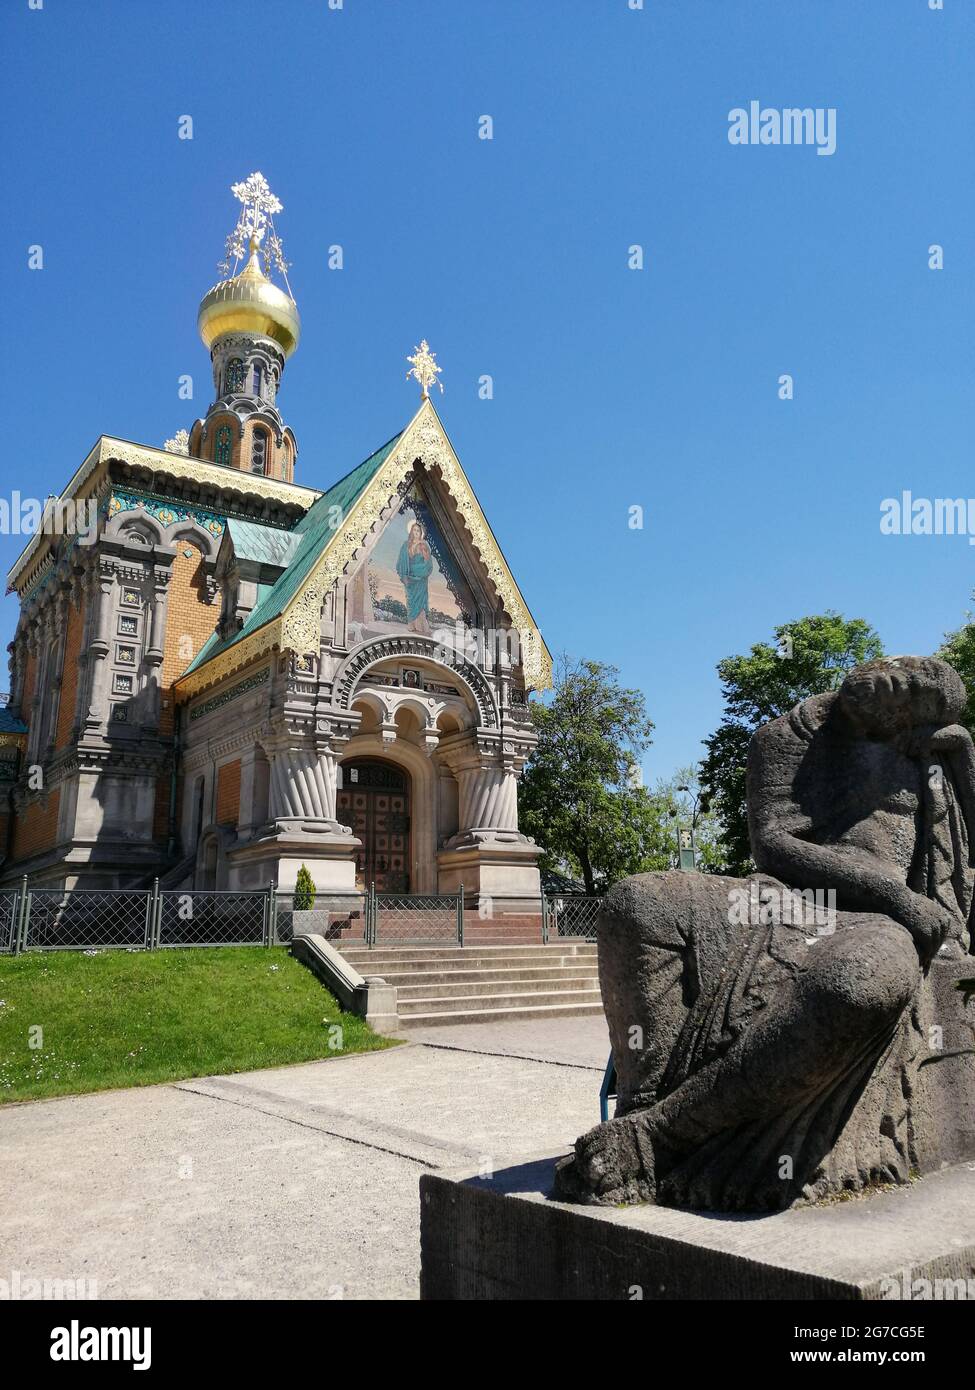 Mathildenhöhe.Russische Orthodoxe Kirche der hl. Maria Magdalena Darmstadt. Sculpture and the Russian Orthodox church in Darmstadt, Hessen, Germany. Stock Photo